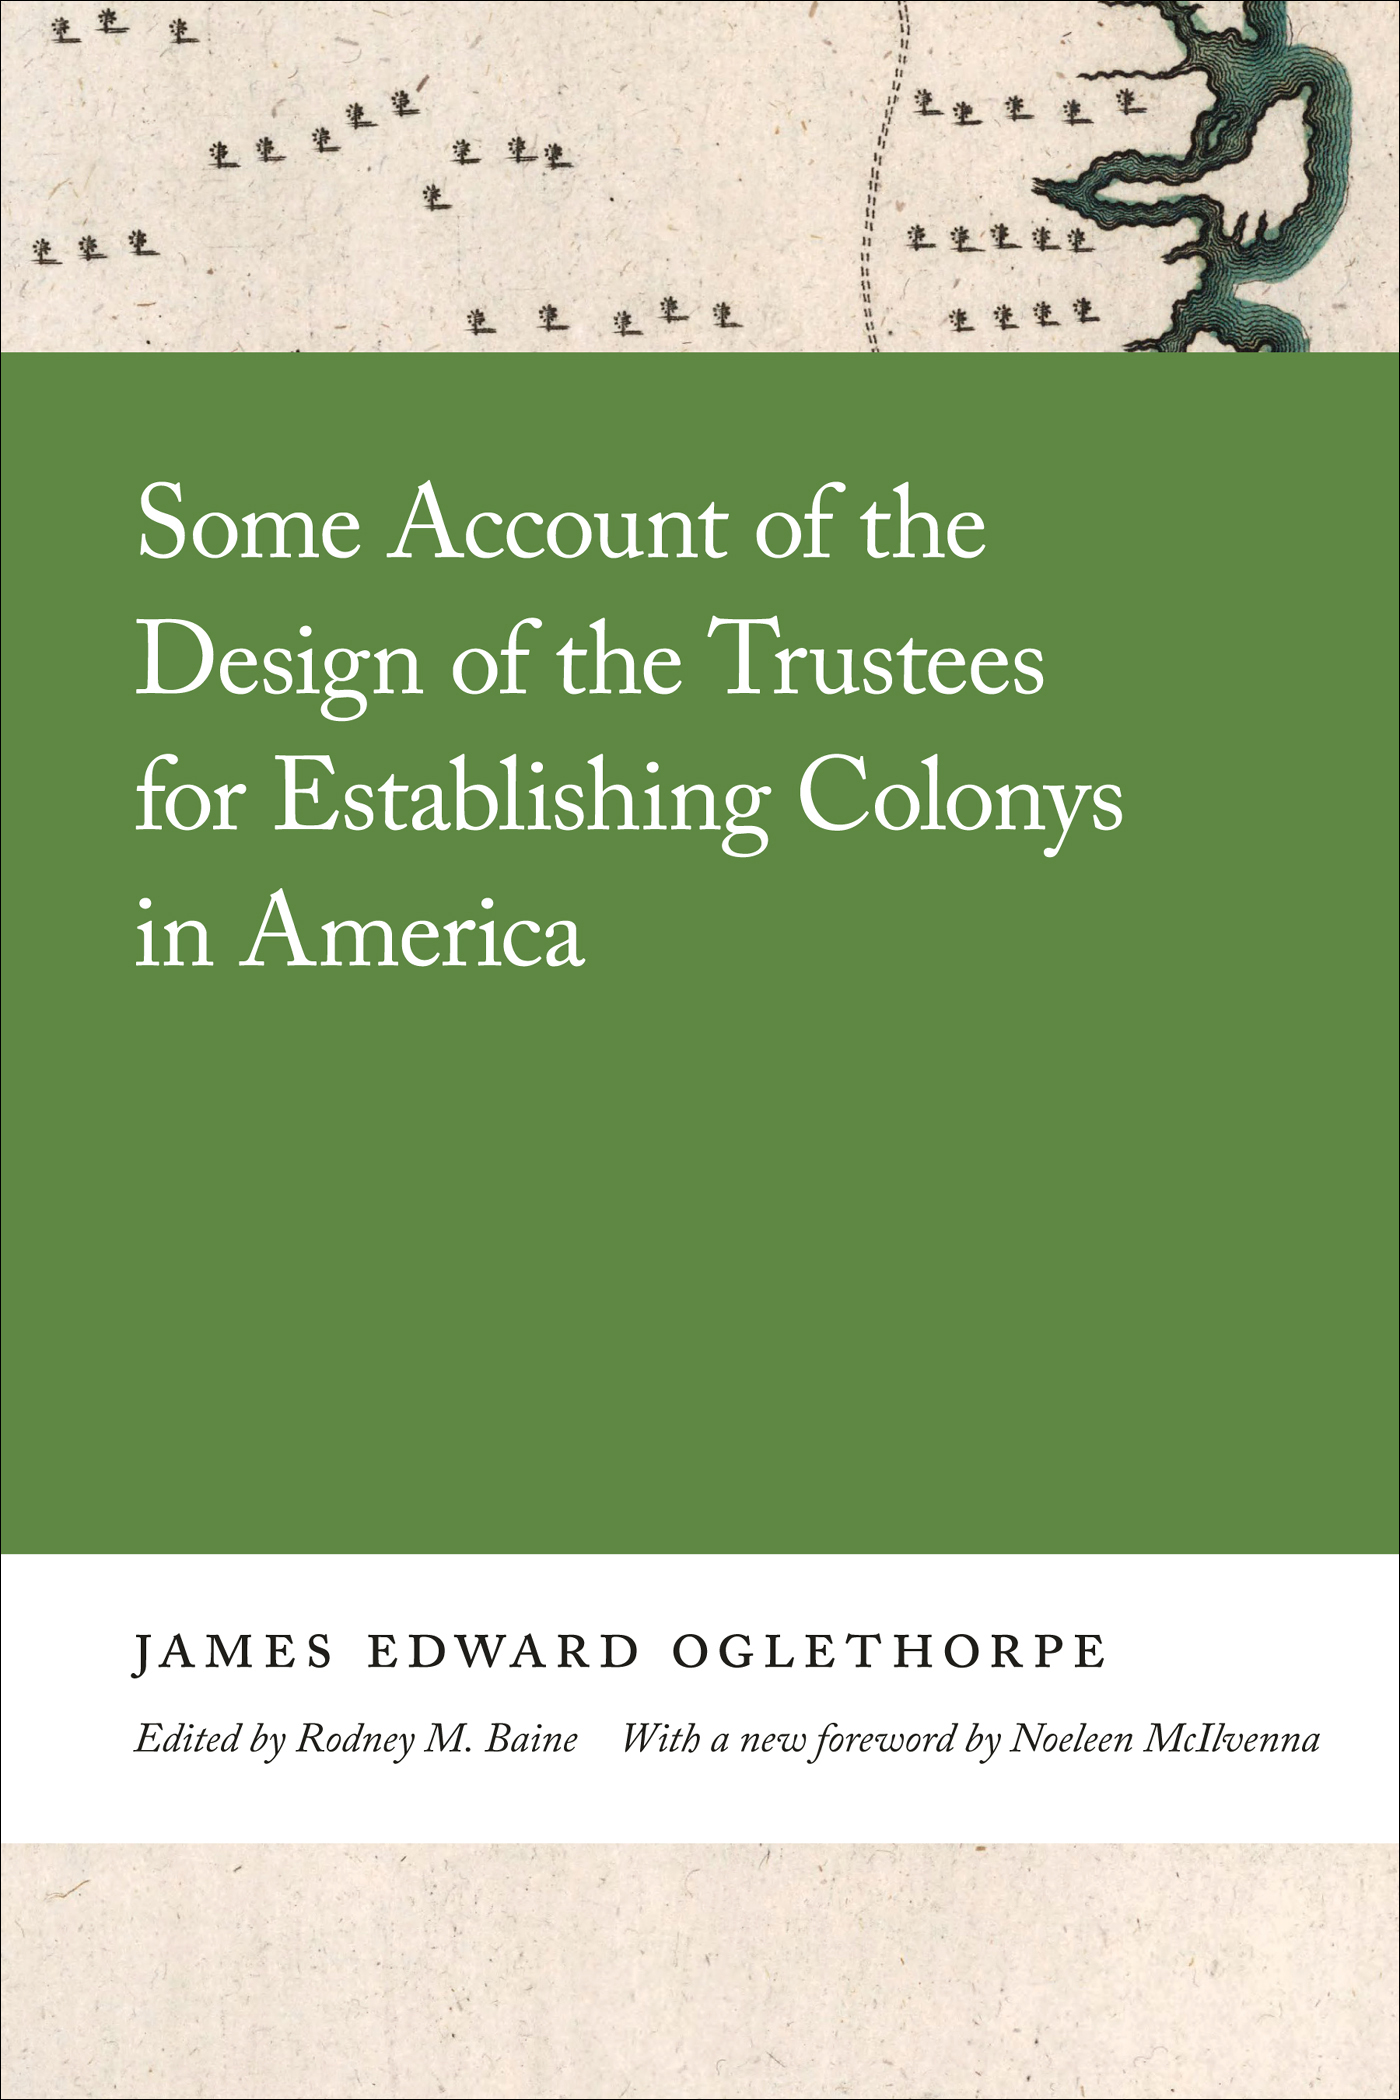 Cover page of the book, Some Accounts of the Design of the Trustees for Establish Colony in America.